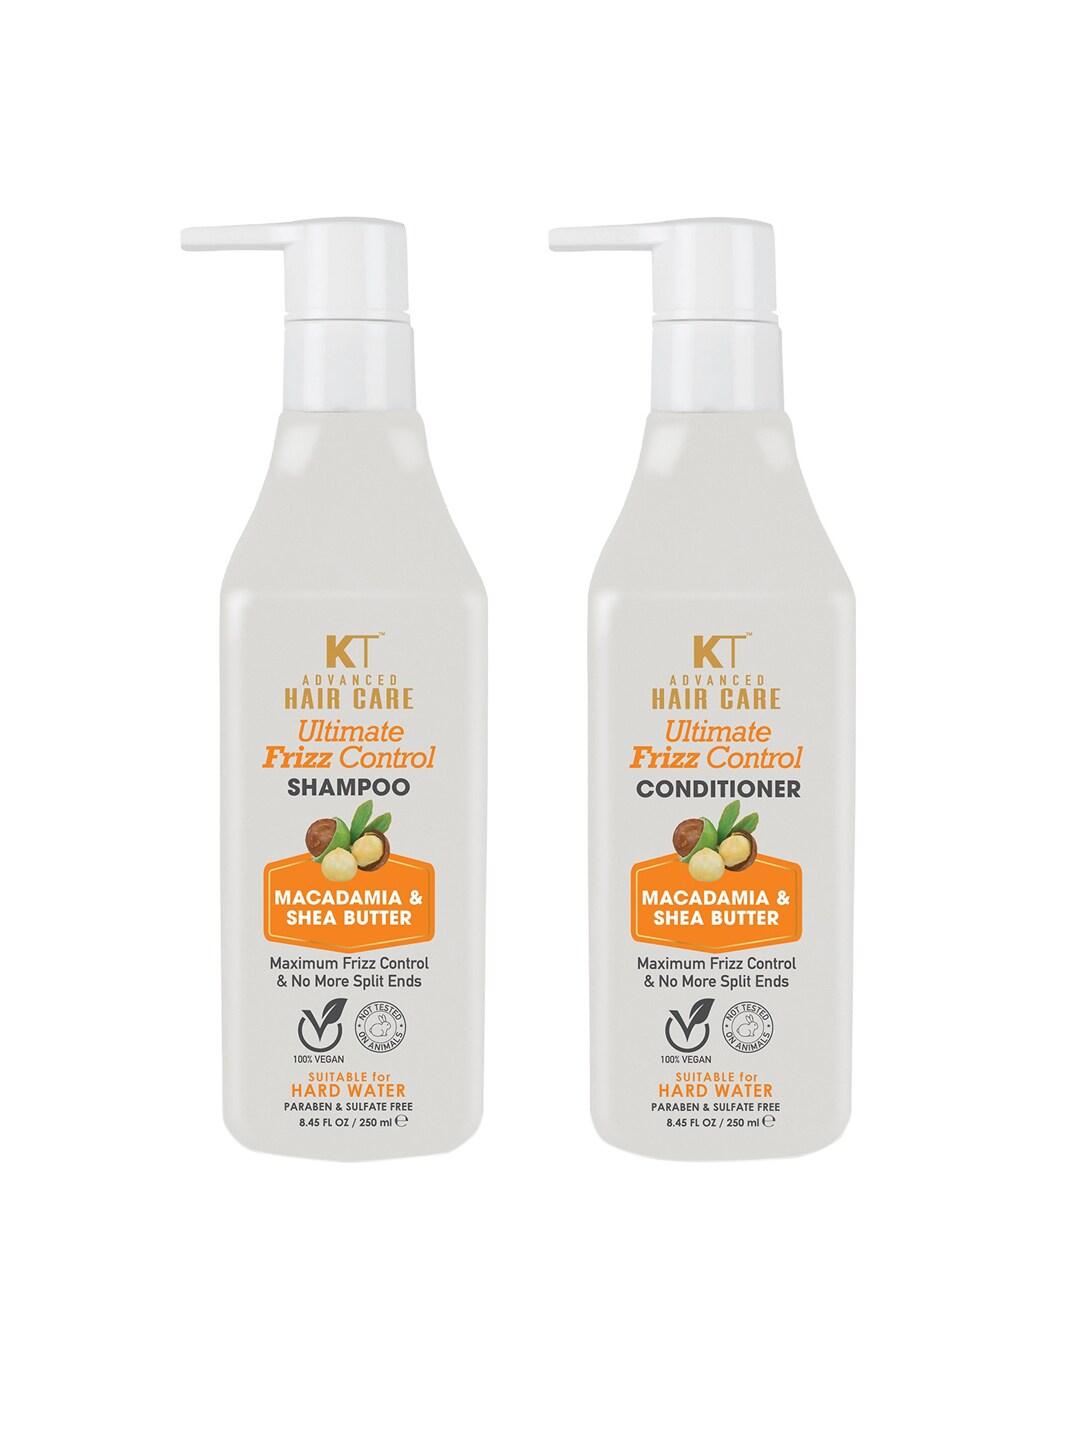 KEHAIRTHERAPY Set of 2 Ultimate Frizz Control Shampoo & Conditioner - 500 ml each